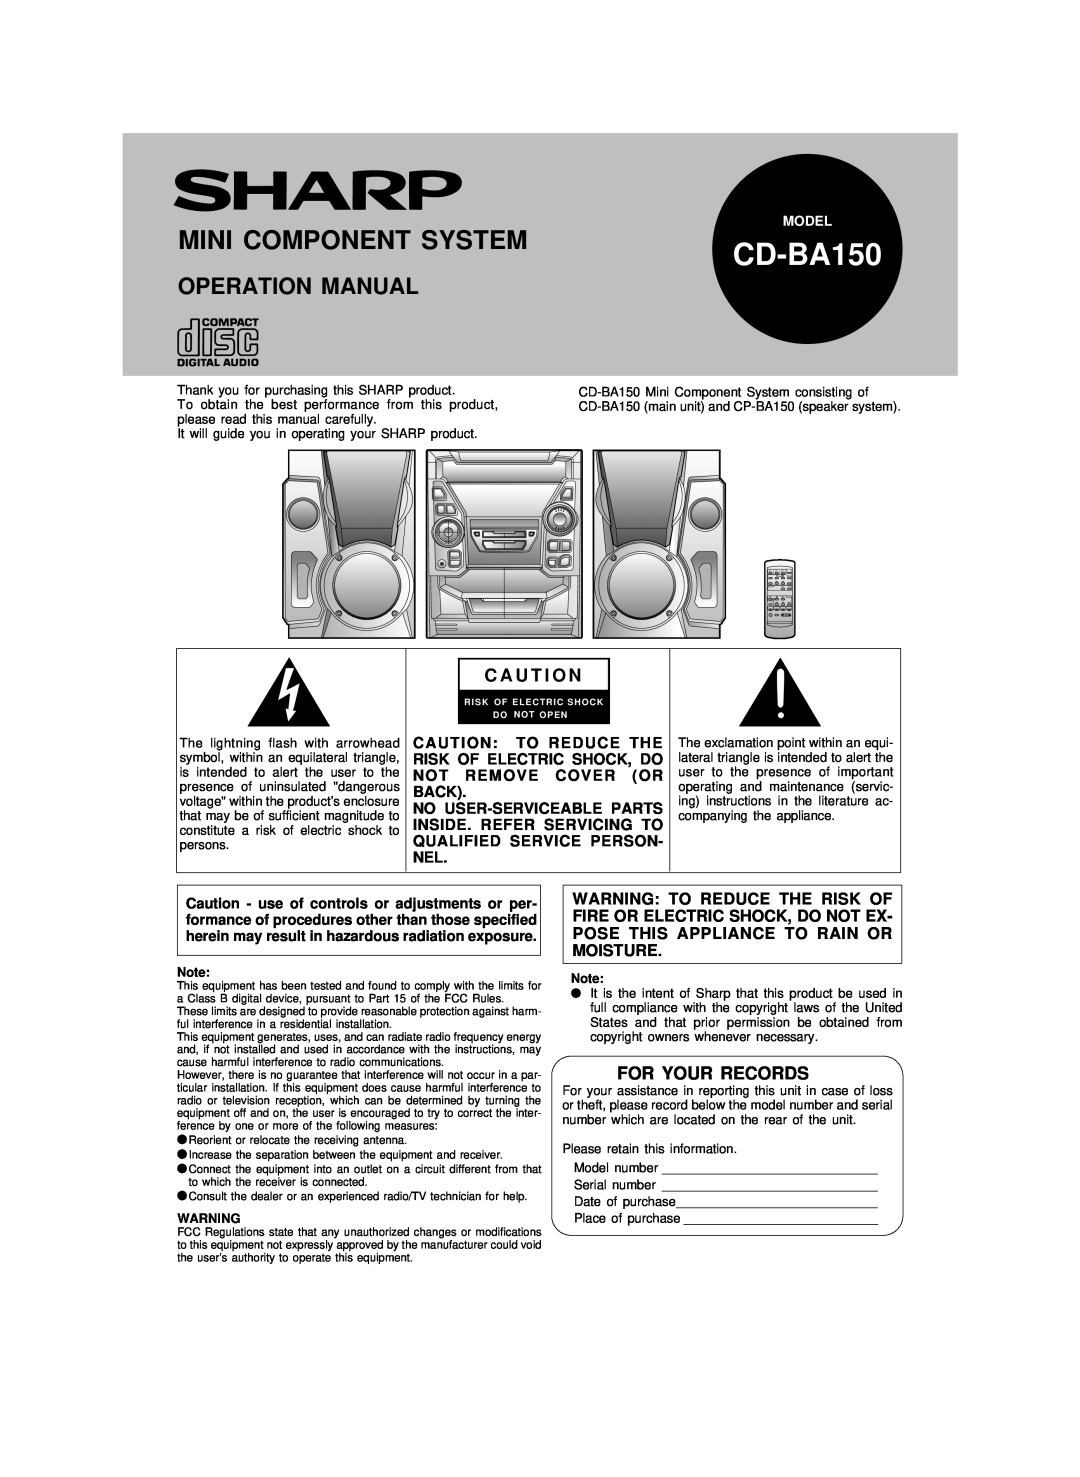 Sharp CP-BA150 operation manual CD-BA150, Mini Component System, C A U T I O N, For Your Records 